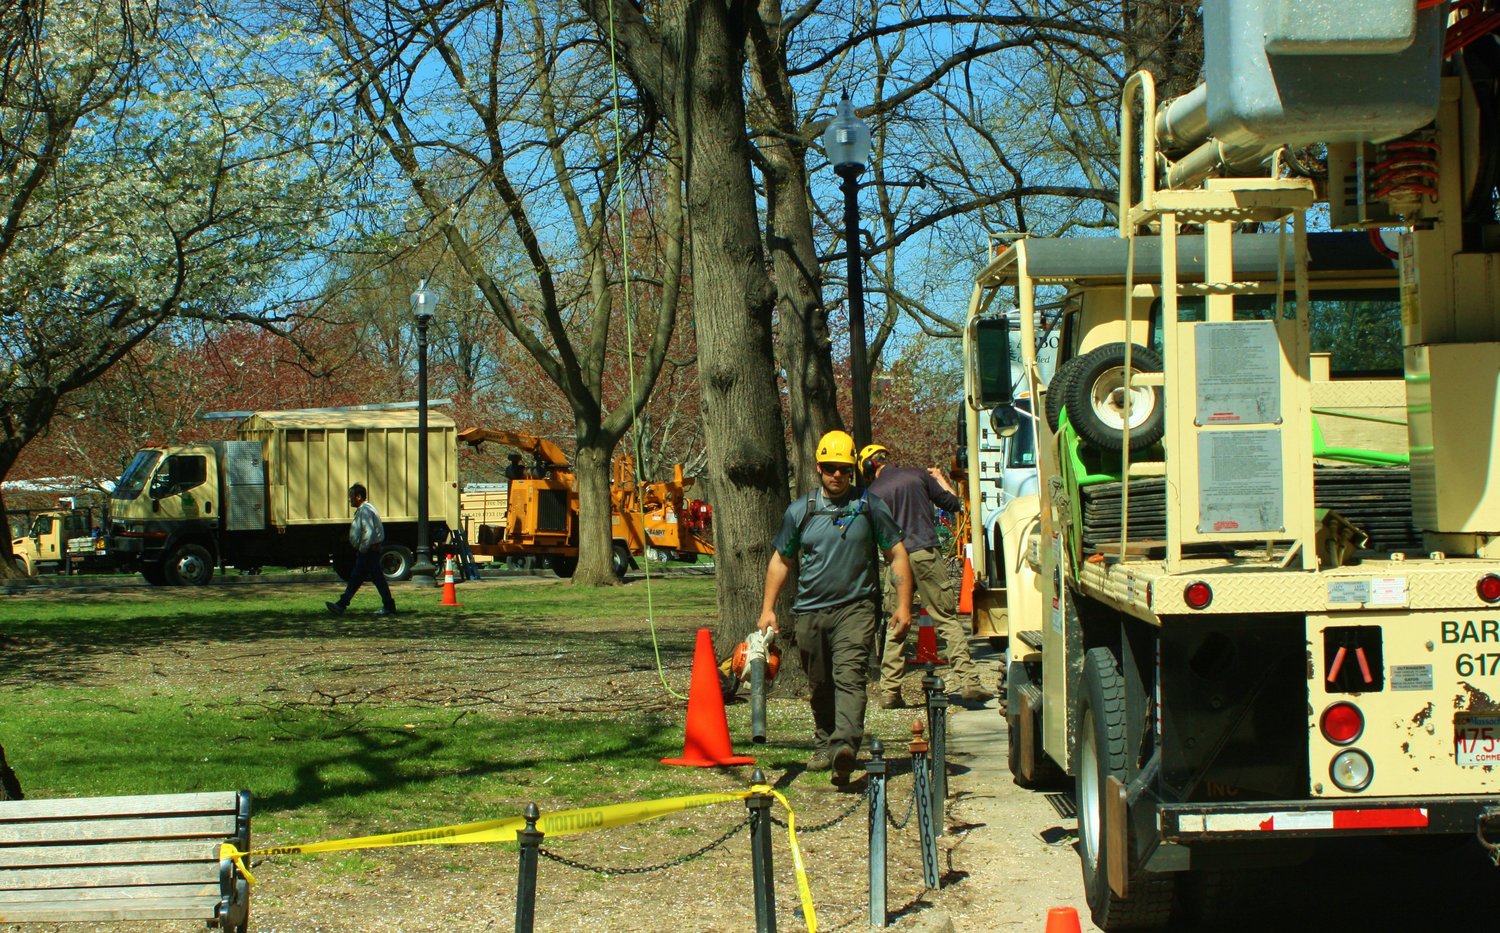 BTSE joined forces with other professional arborists to help care for public trees throughout Massachusetts